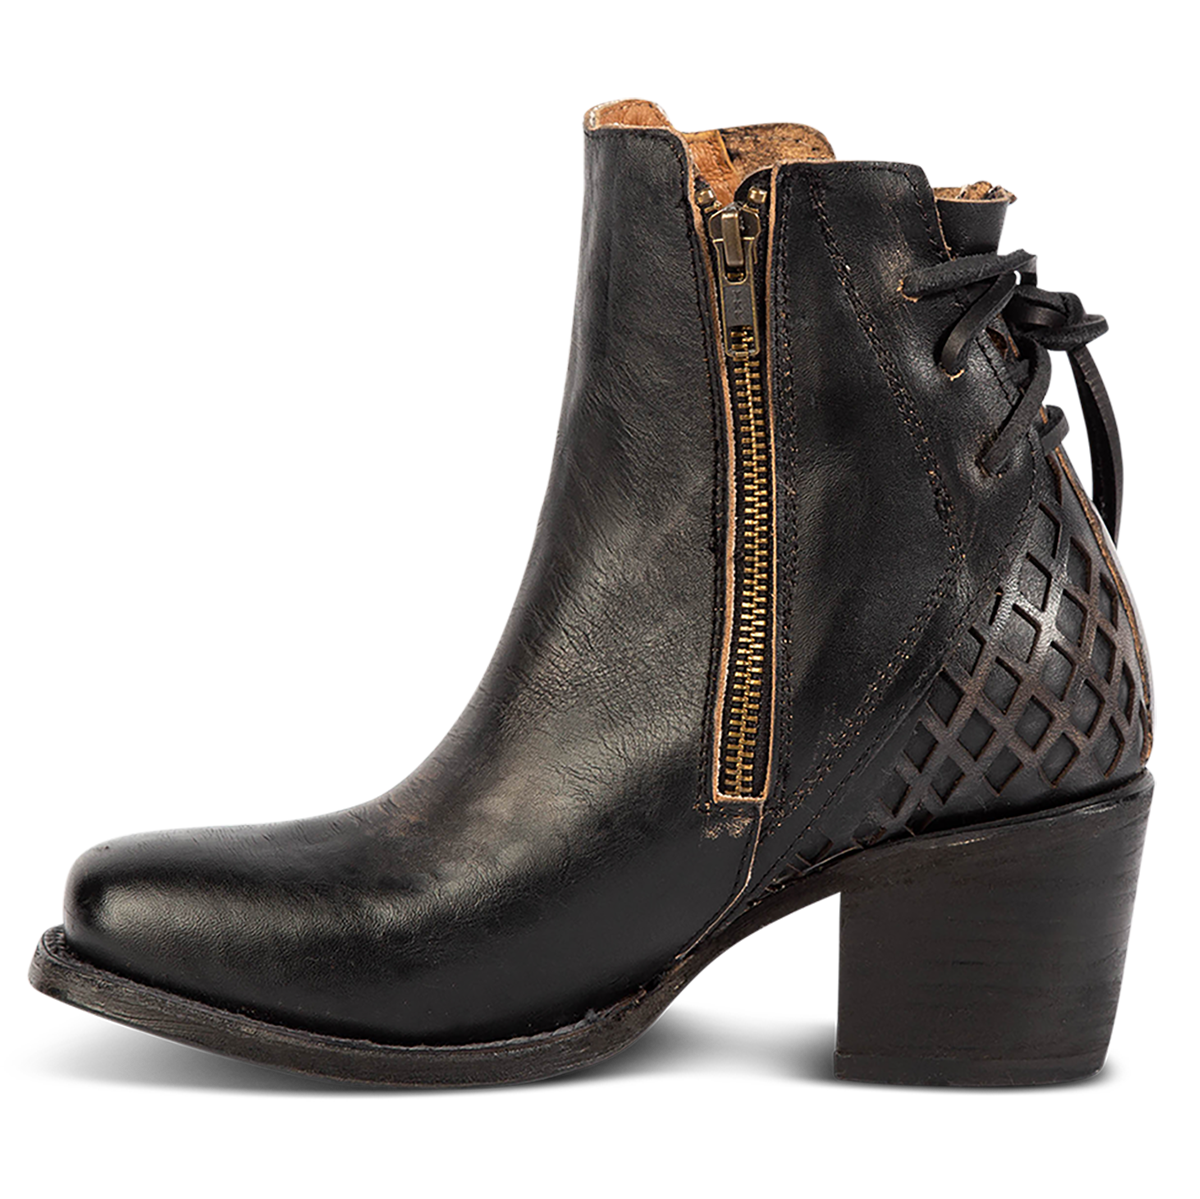 Inside view showing working brass zipper, laser cut detailing, and a stacked heel on FREEBIRD women's Dreamer black leather bootie 